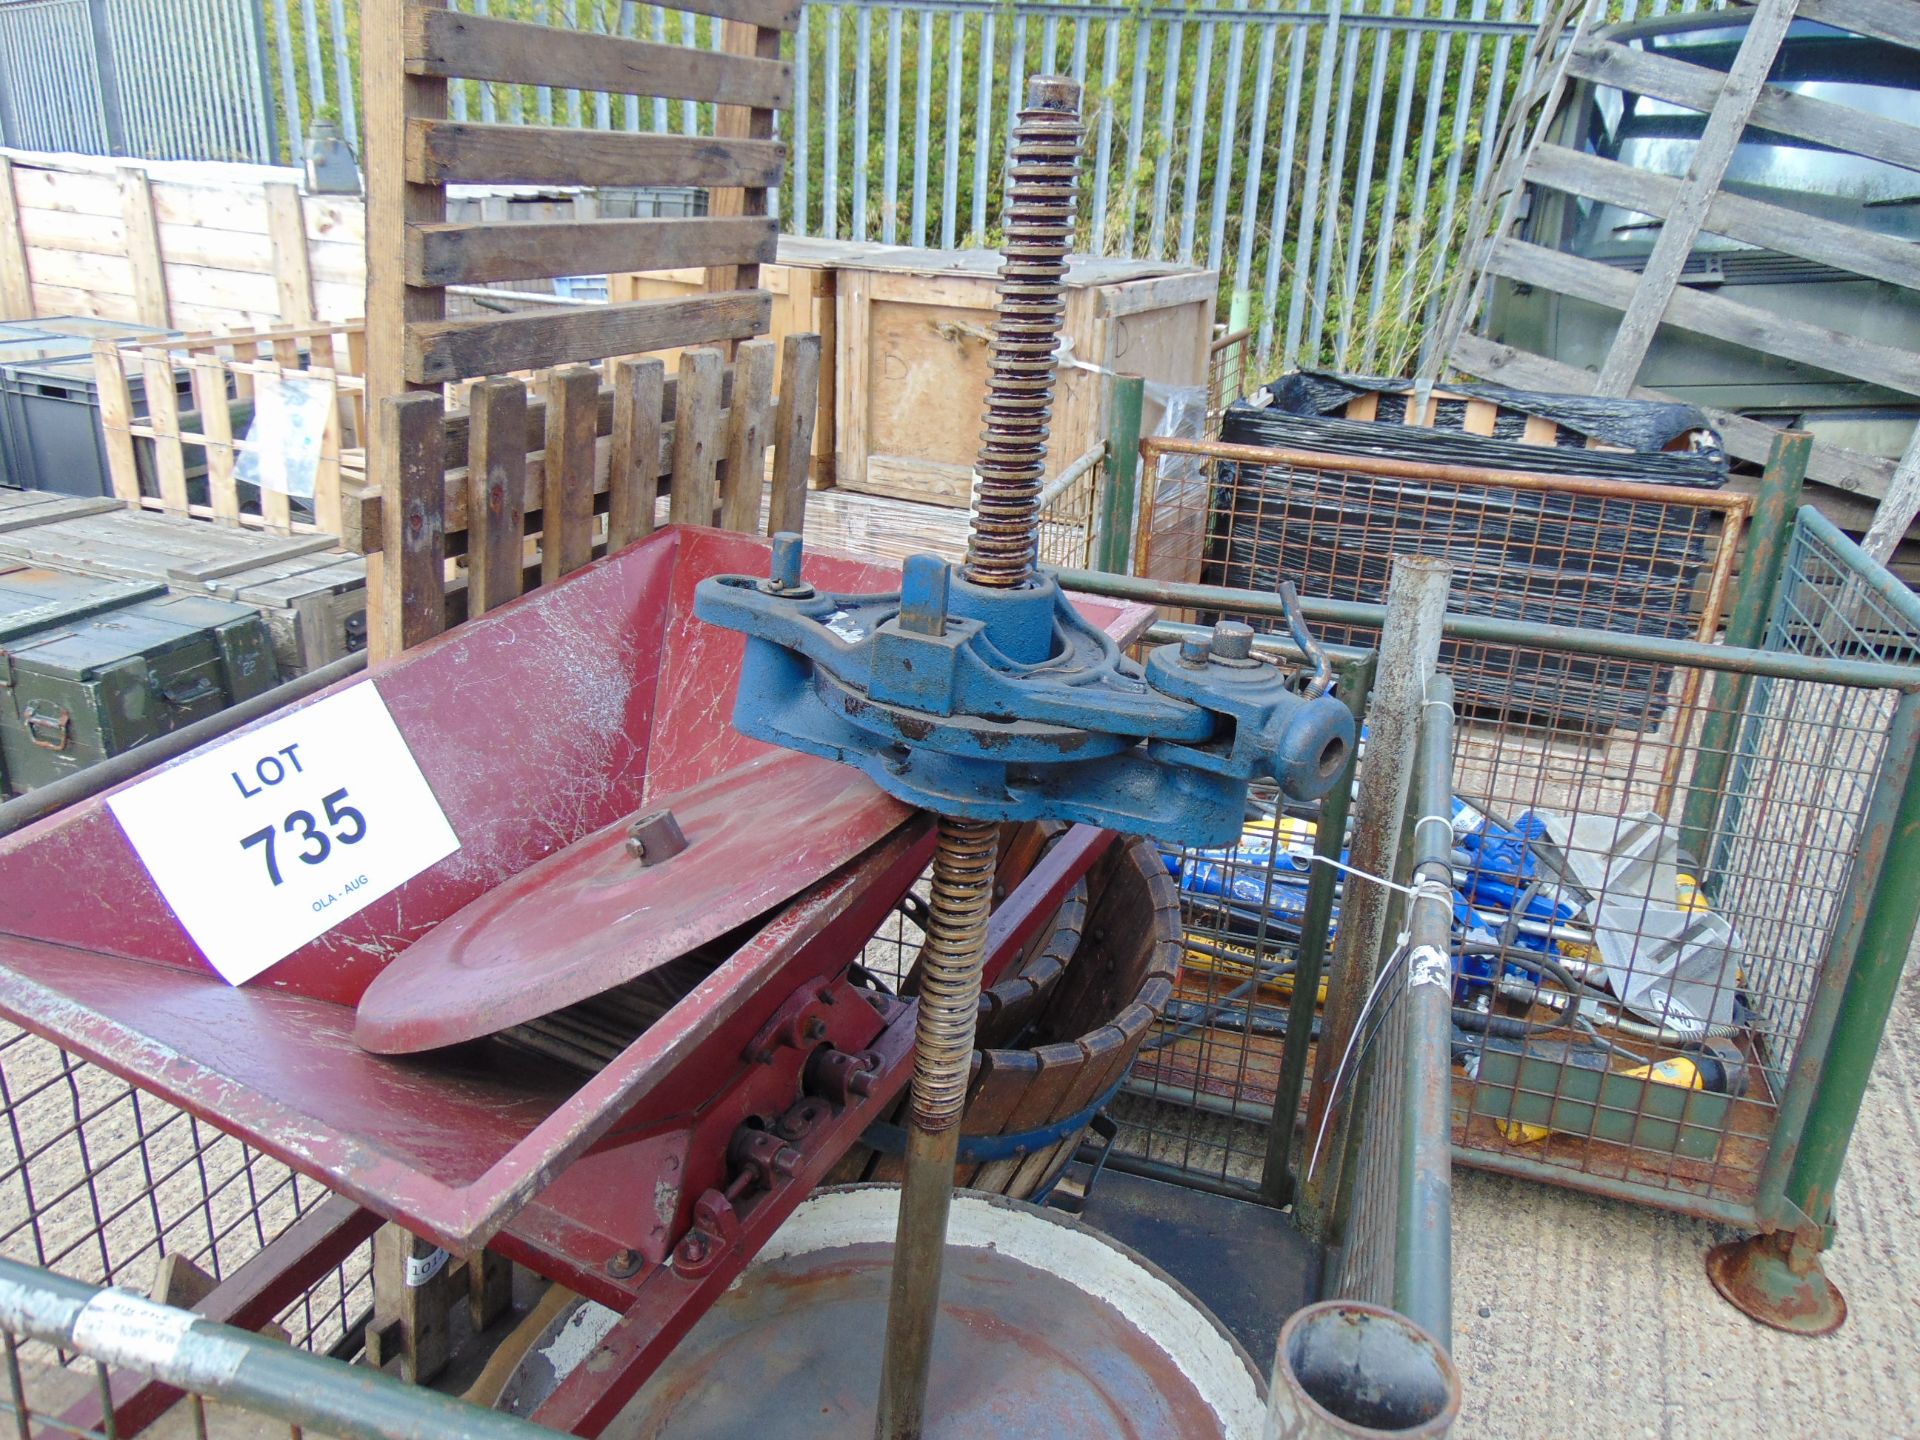 Very Unusual Apple Press for Pressing Apples Fruit Etc. and Making Juice, Cider etc - Image 6 of 6